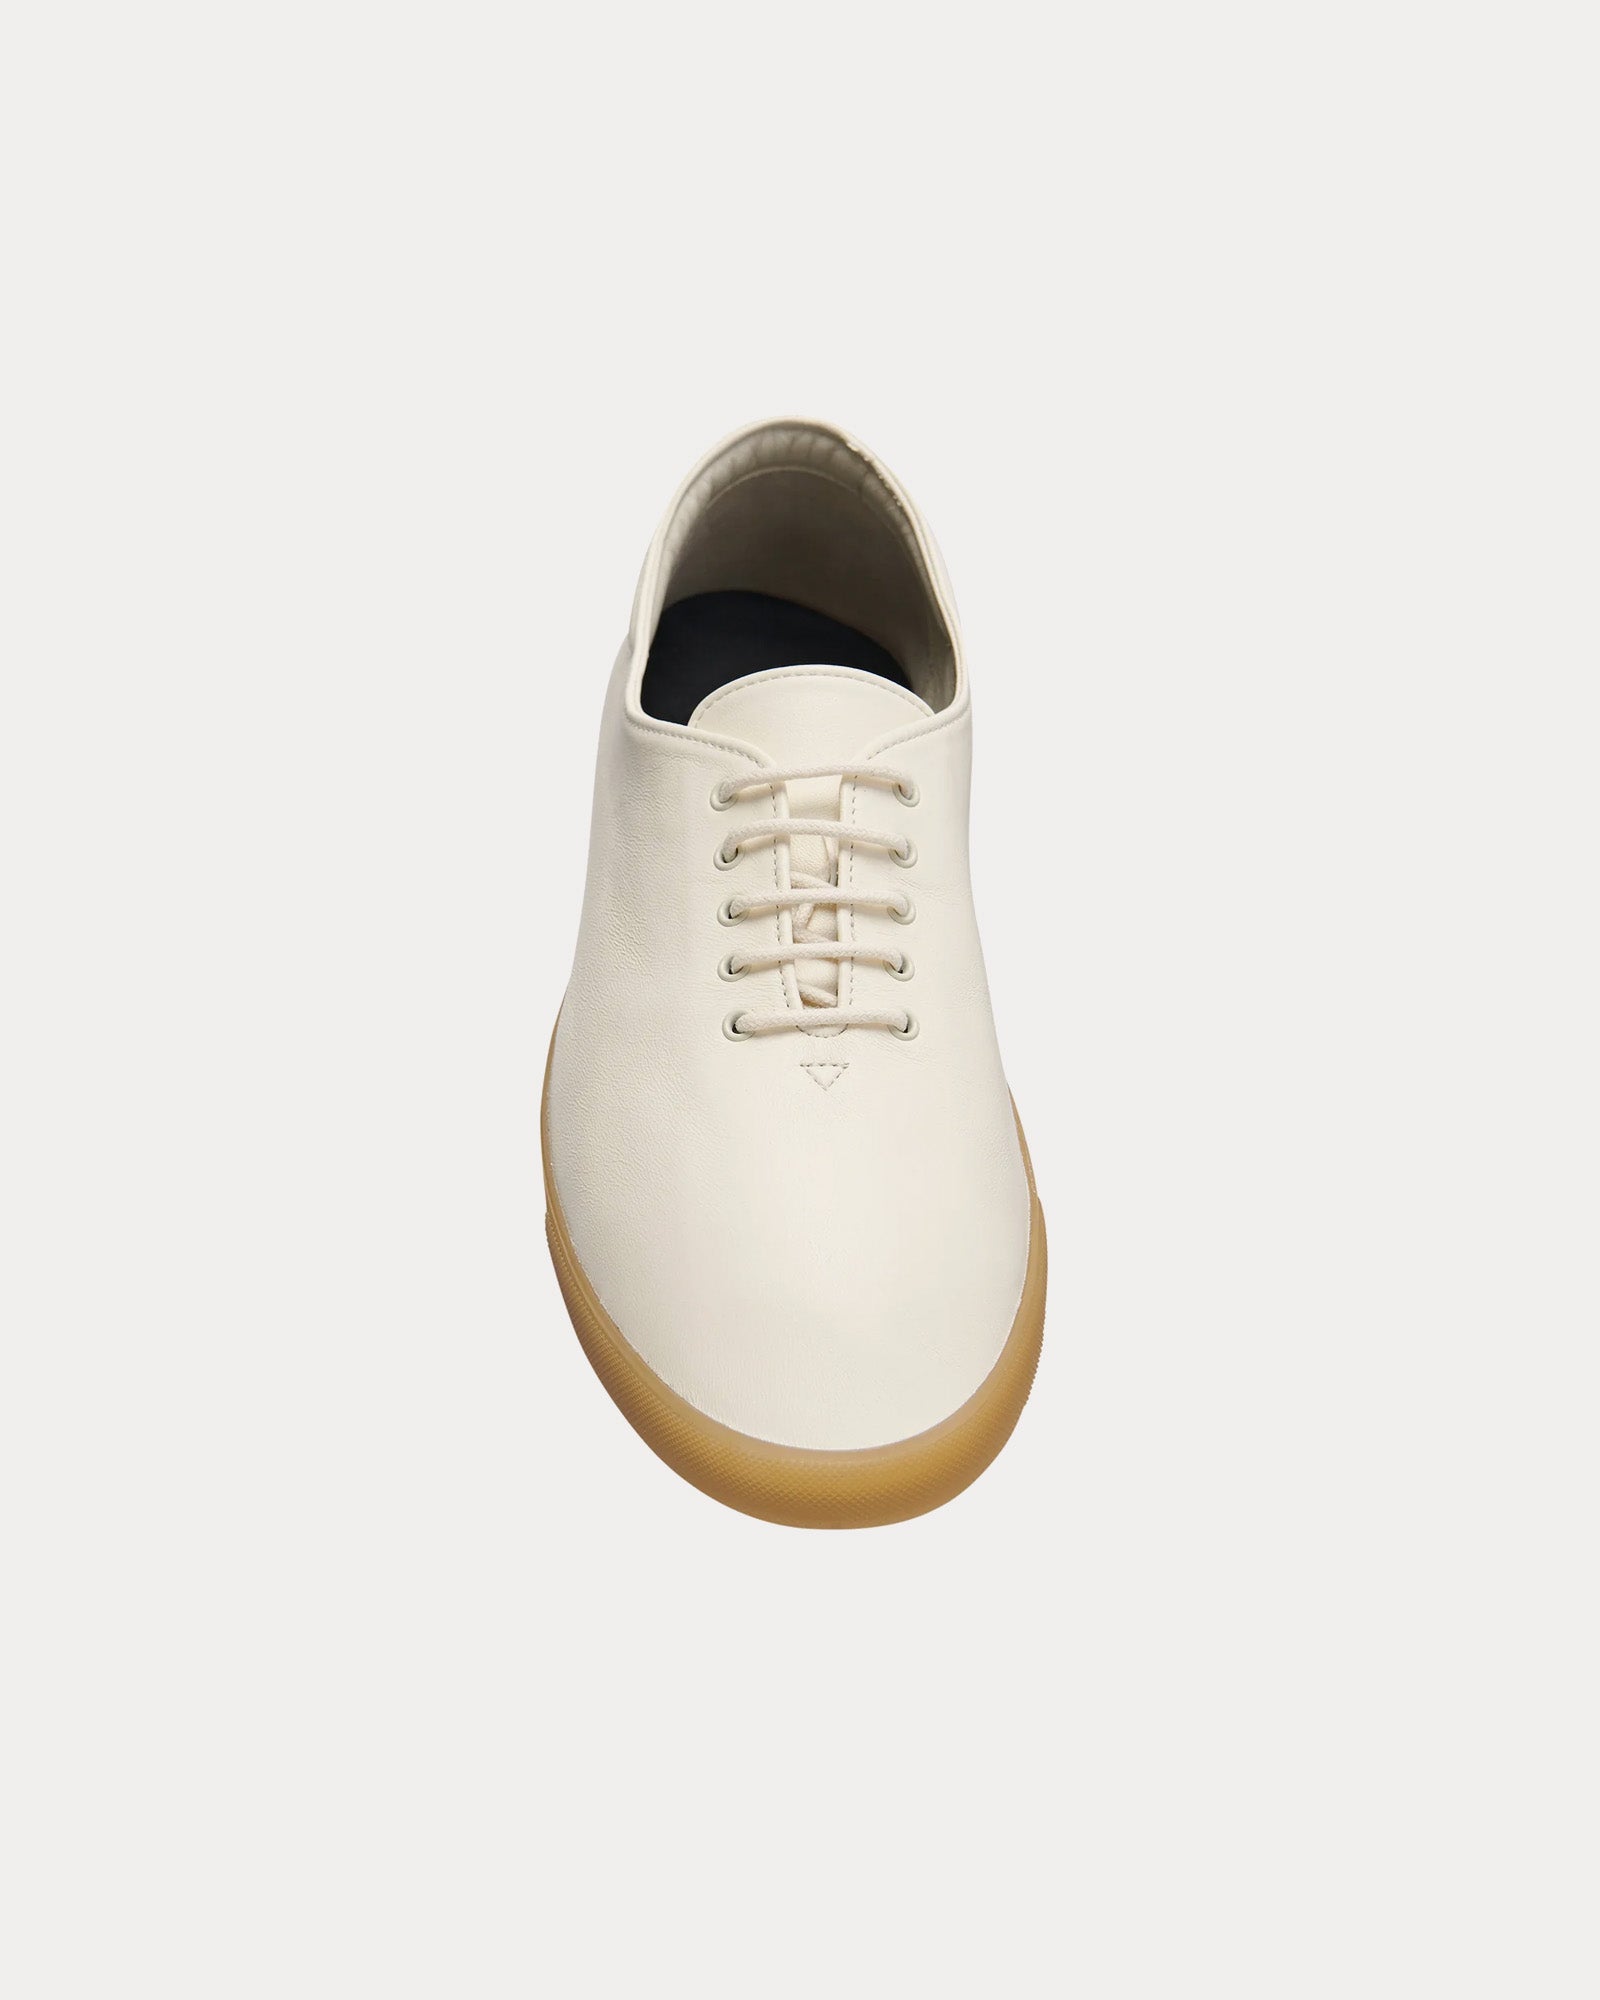 The Row - Sam Leather Creme / Honey Low Top Sneakers